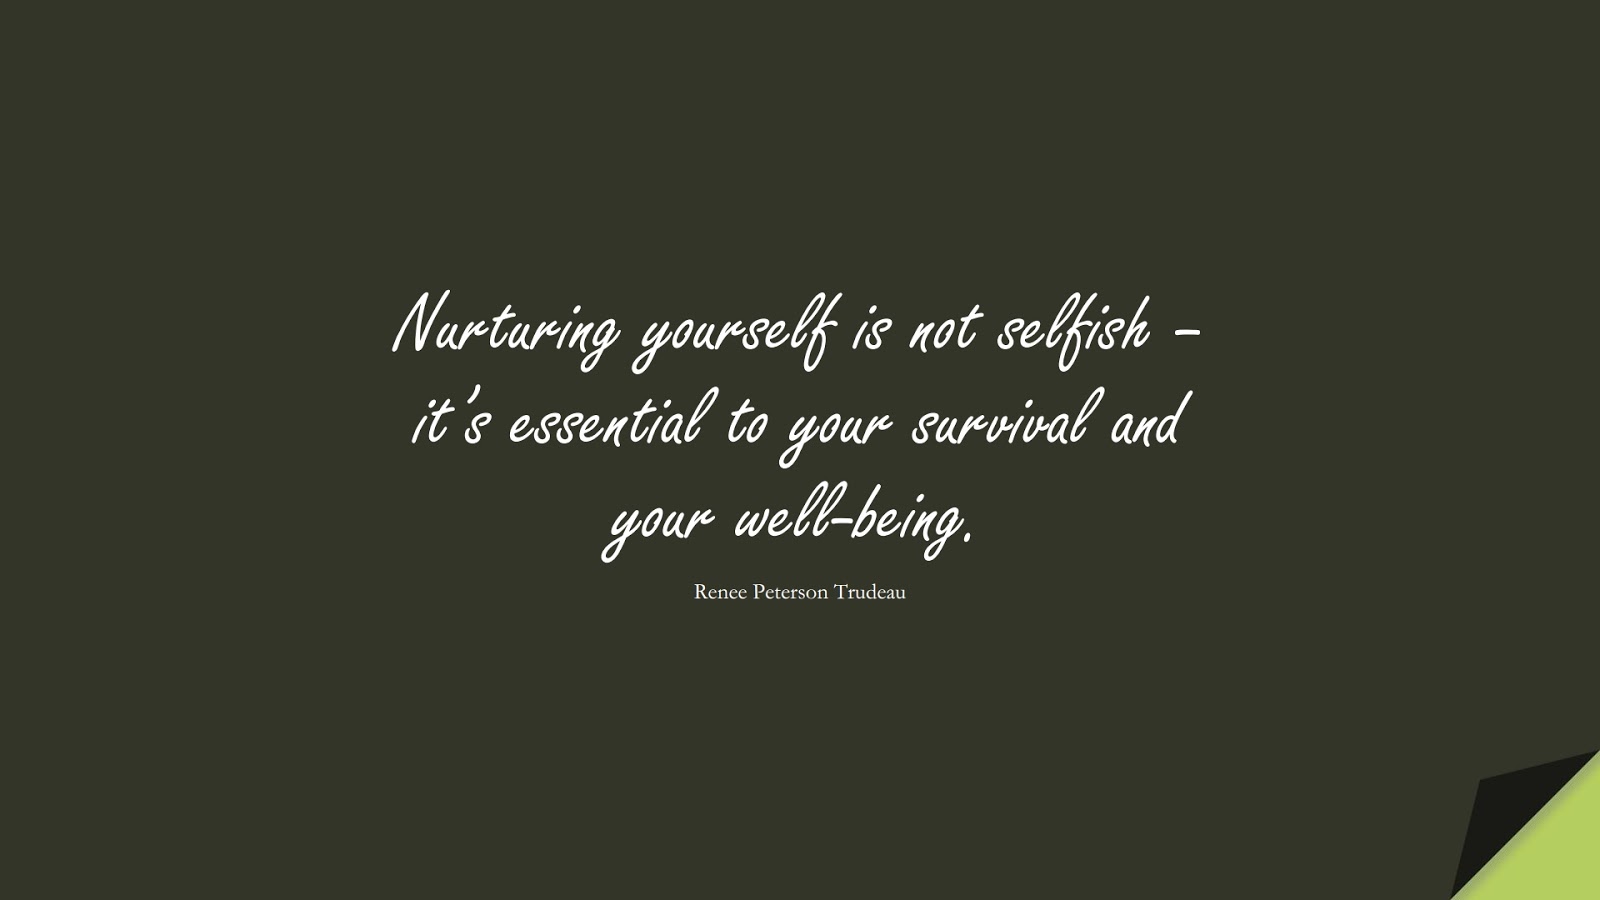 Nurturing yourself is not selfish – it’s essential to your survival and your well-being. (Renee Peterson Trudeau);  #HealthQuotes